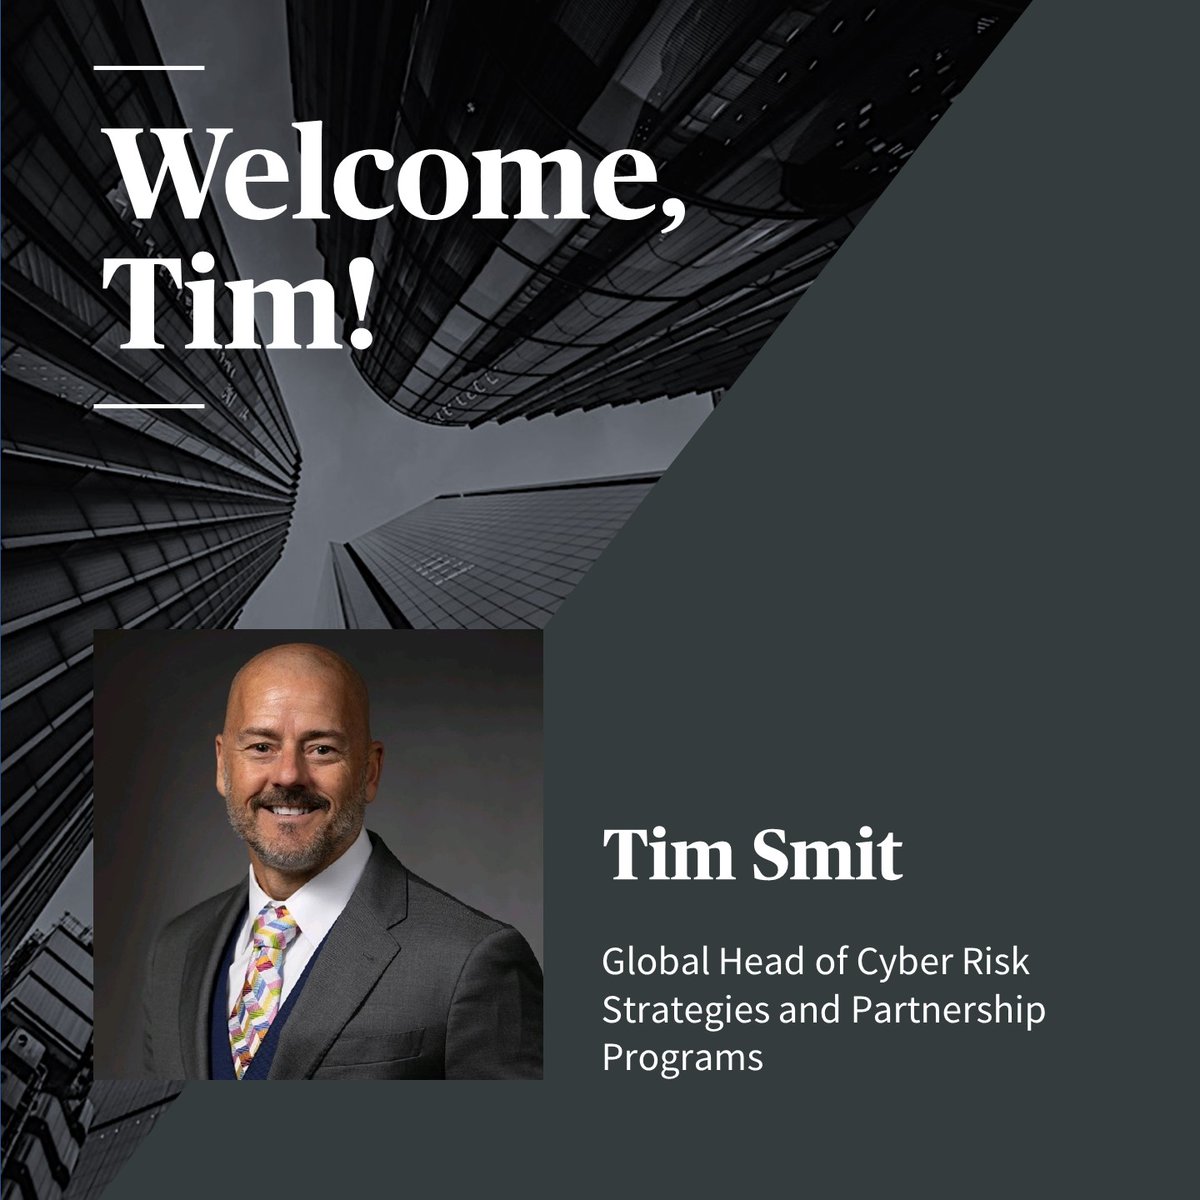 We’re excited to welcome Tim Smit as Global Head of Cyber Risk Strategies and Partnership Programs. As part of @AXA’s Cyber Center of Expertise, Tim will help us pioneer new cyber risk services and innovative partnerships to help our clients stay ahead of cyber threats. #talent